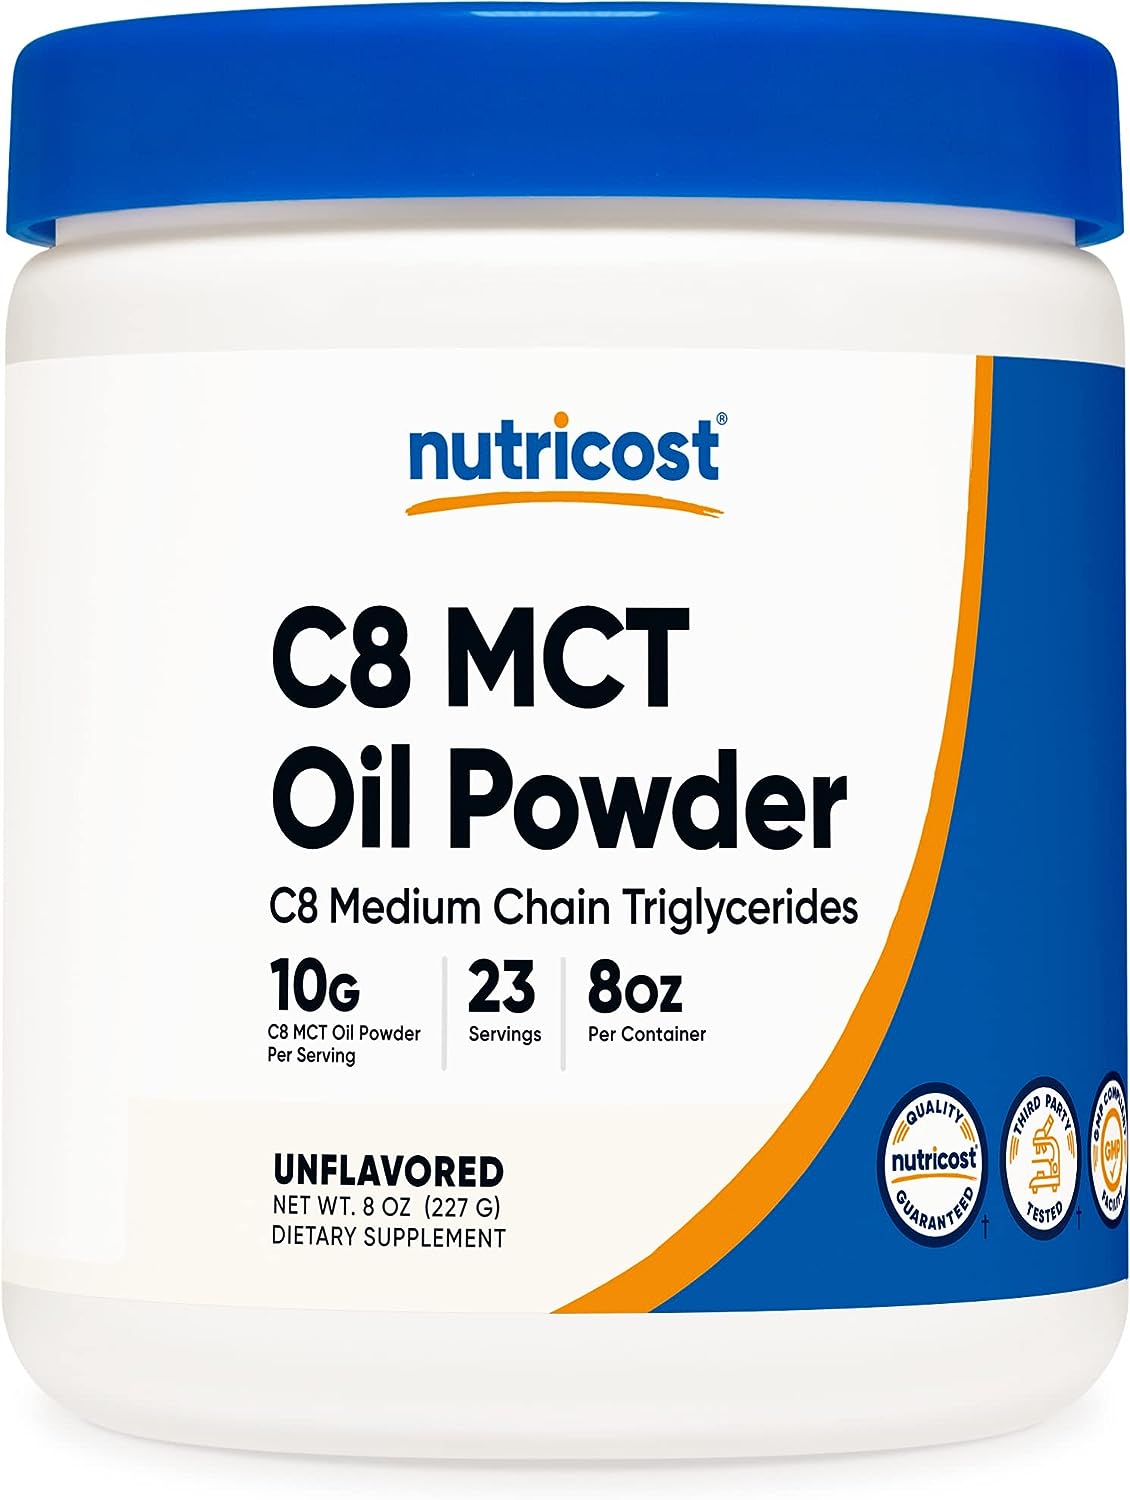 Nutricost C8 MCT Oil Powder 23 Servings (8) - 95% C8 MCT Oil Powder